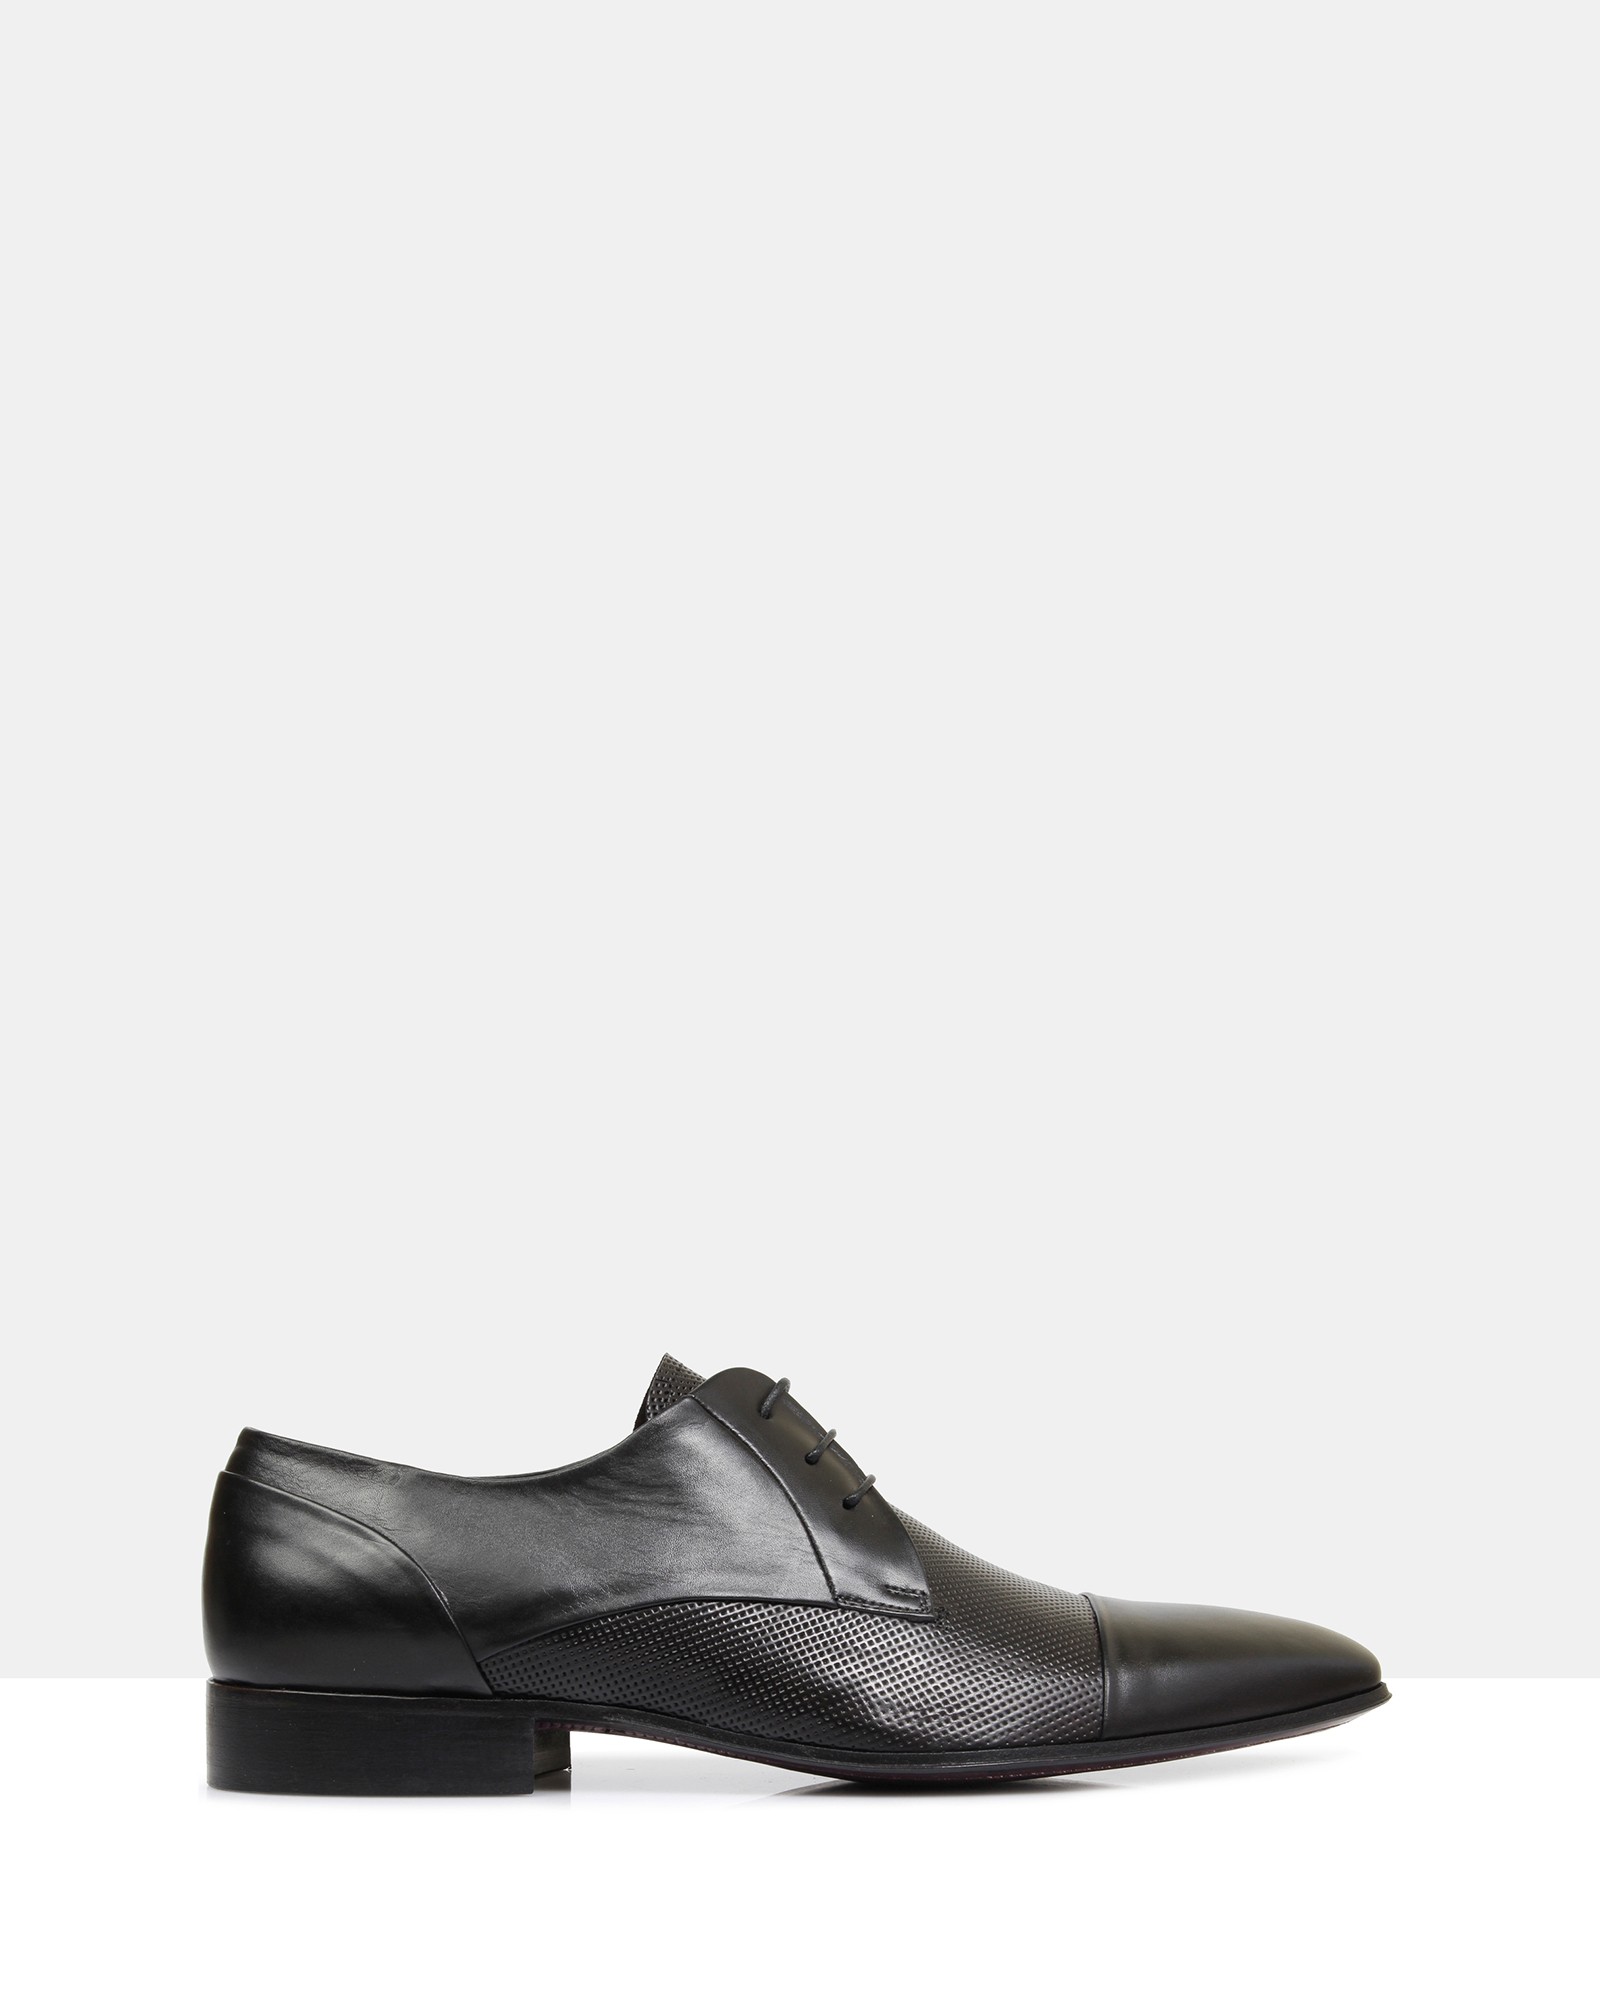 Ross Leather Derby Shoes Nero by Brando | ShoeSales